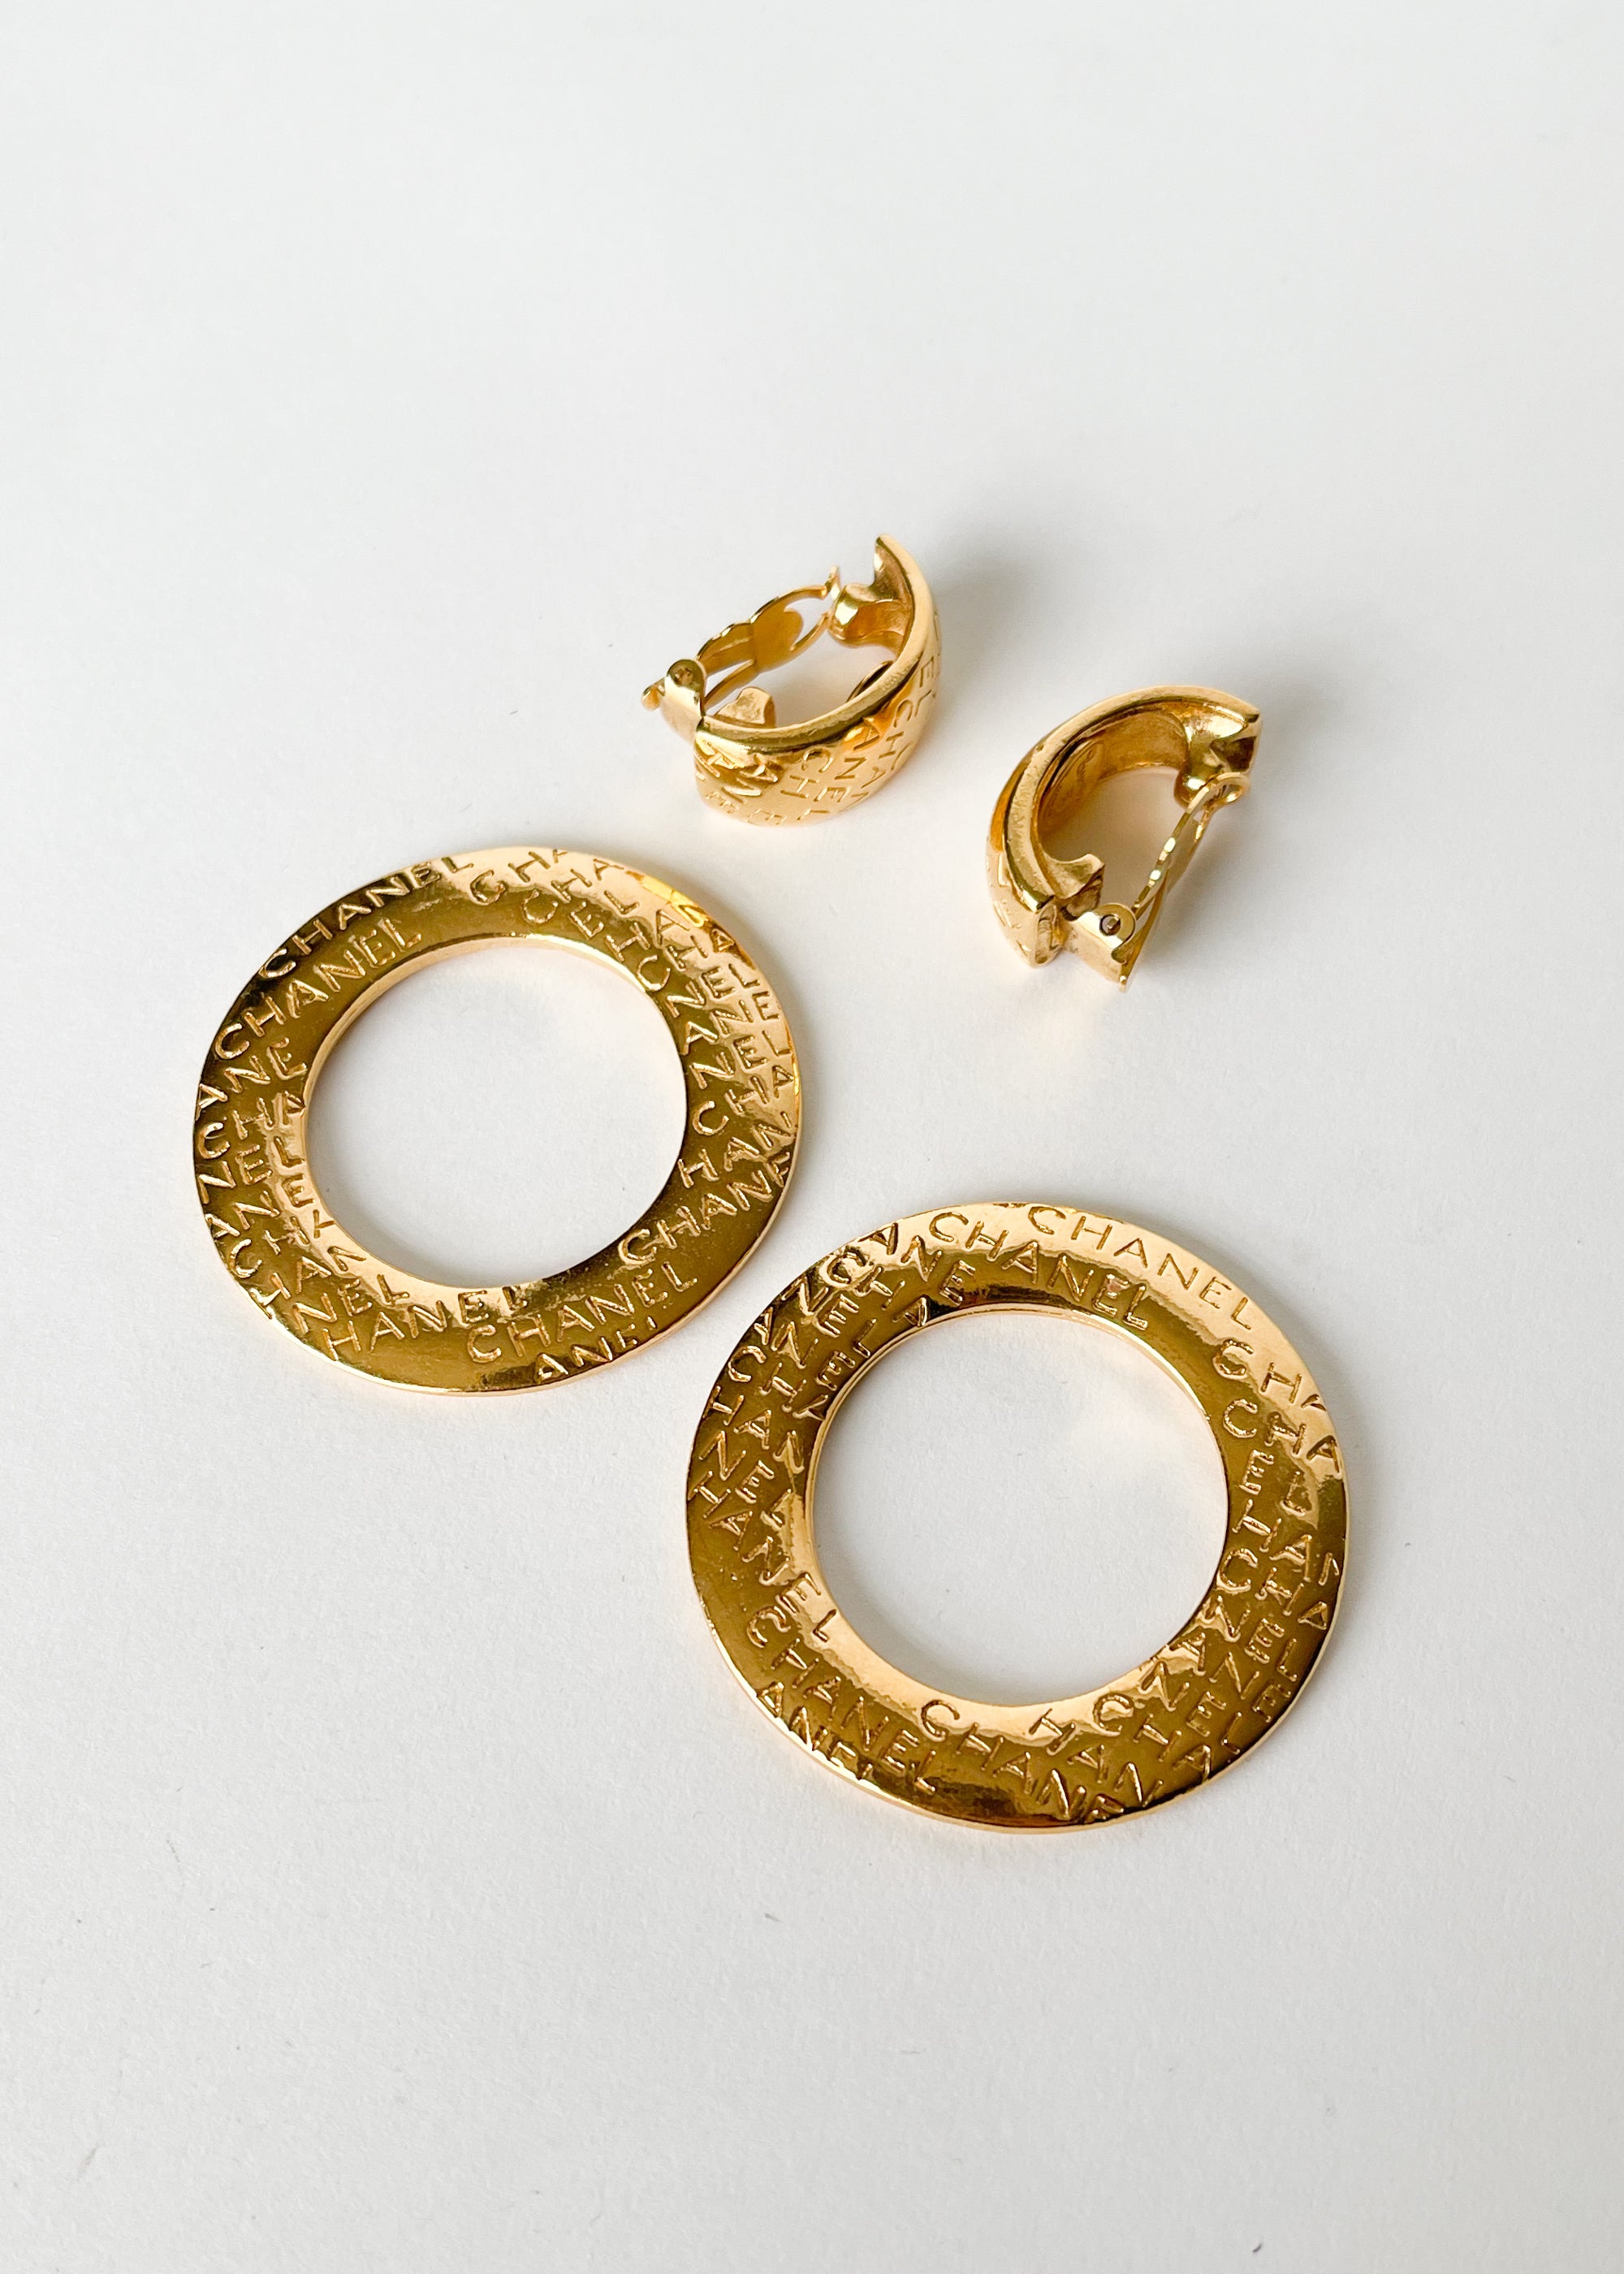 CHANEL CC Gold Metal Tone Large Circle Hoop Evening Earrings